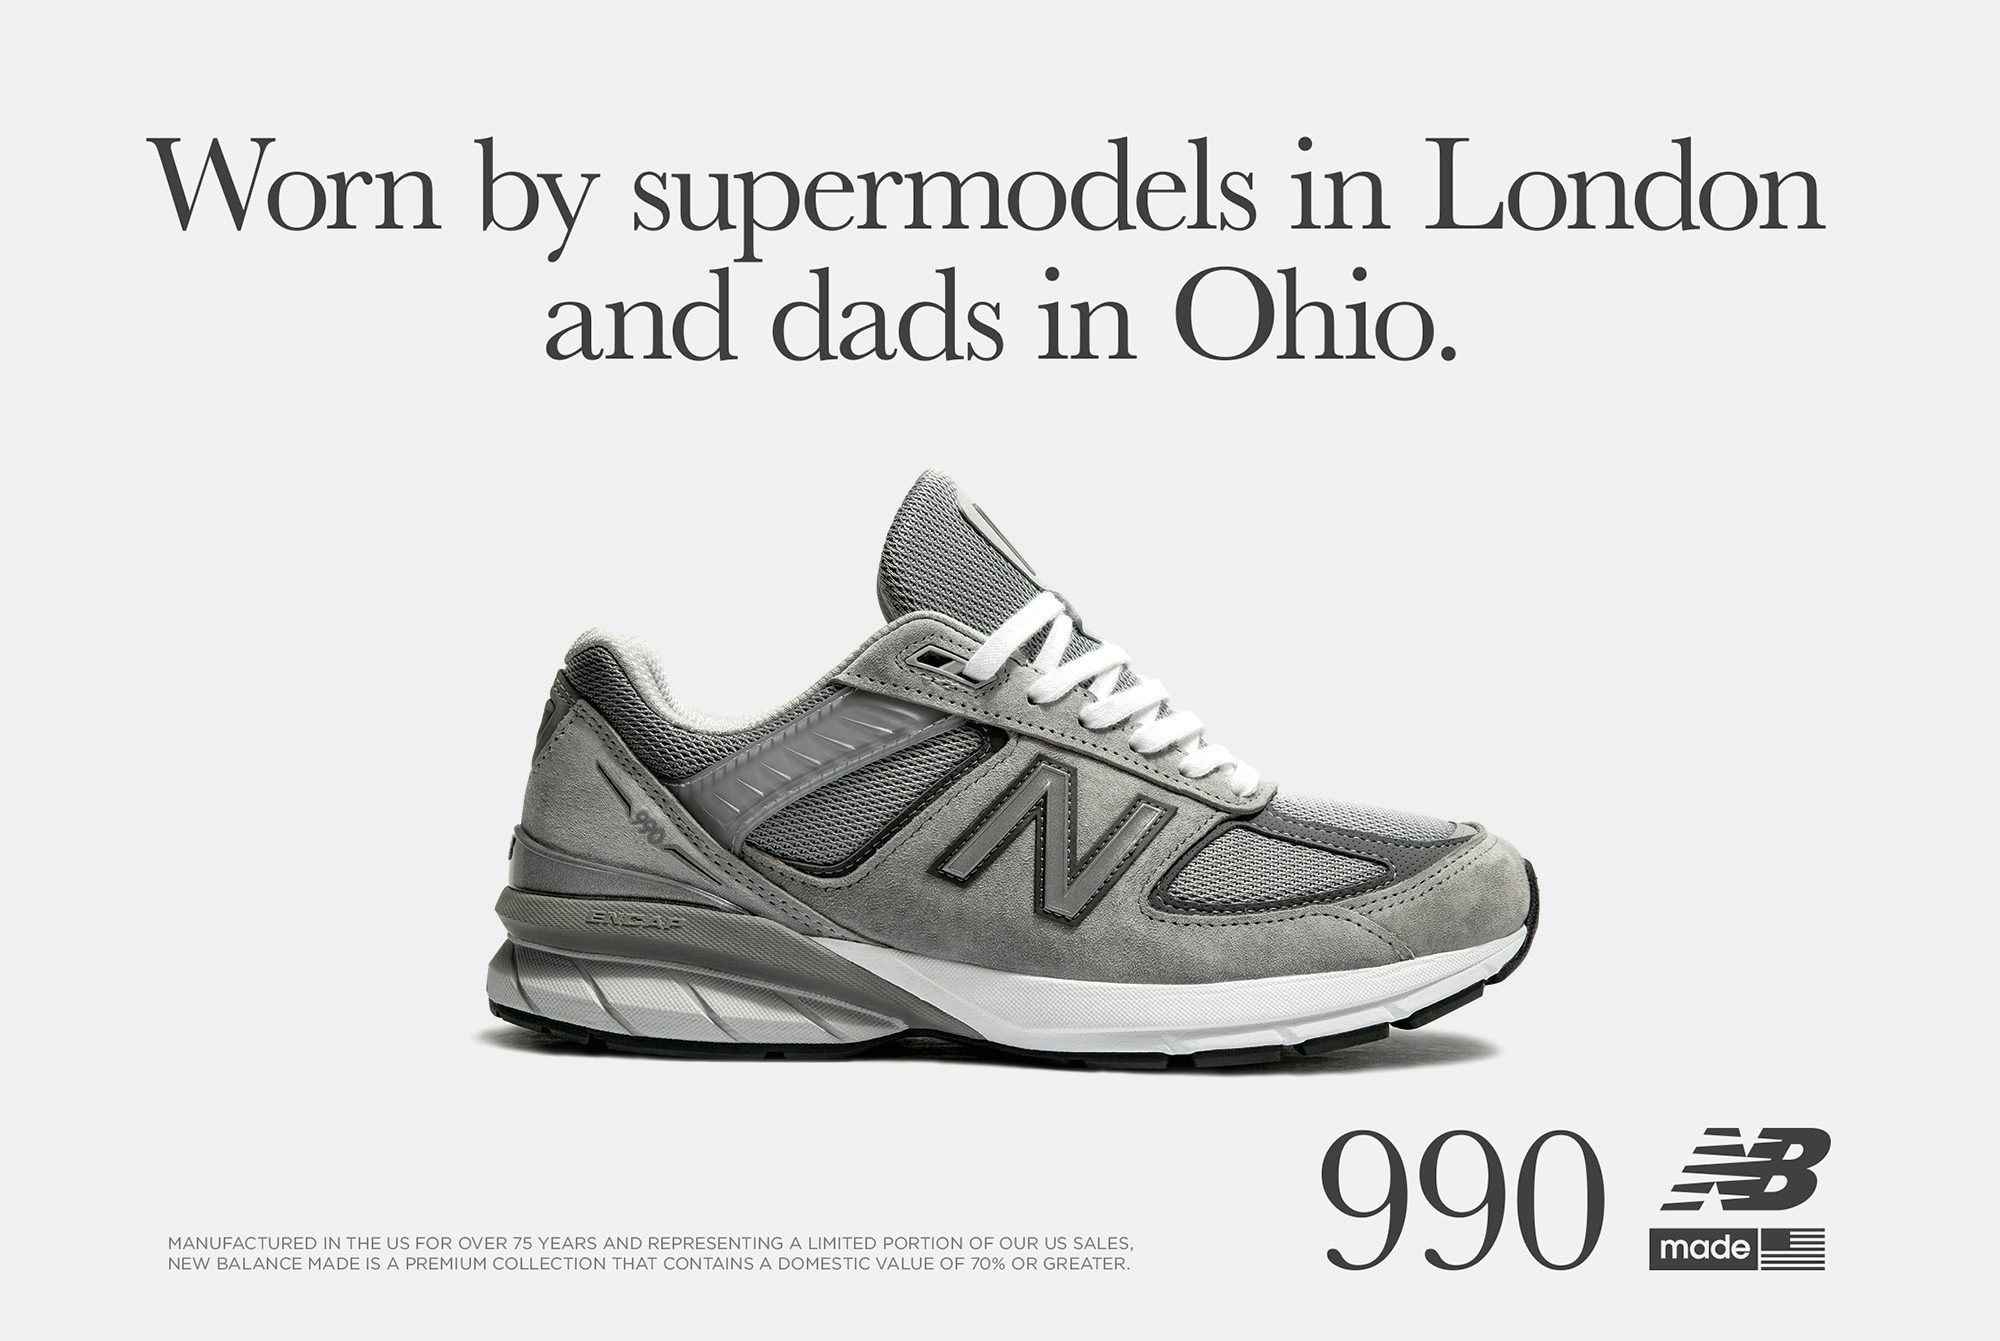 Photograph of a grey New Balance 990v5 trainer